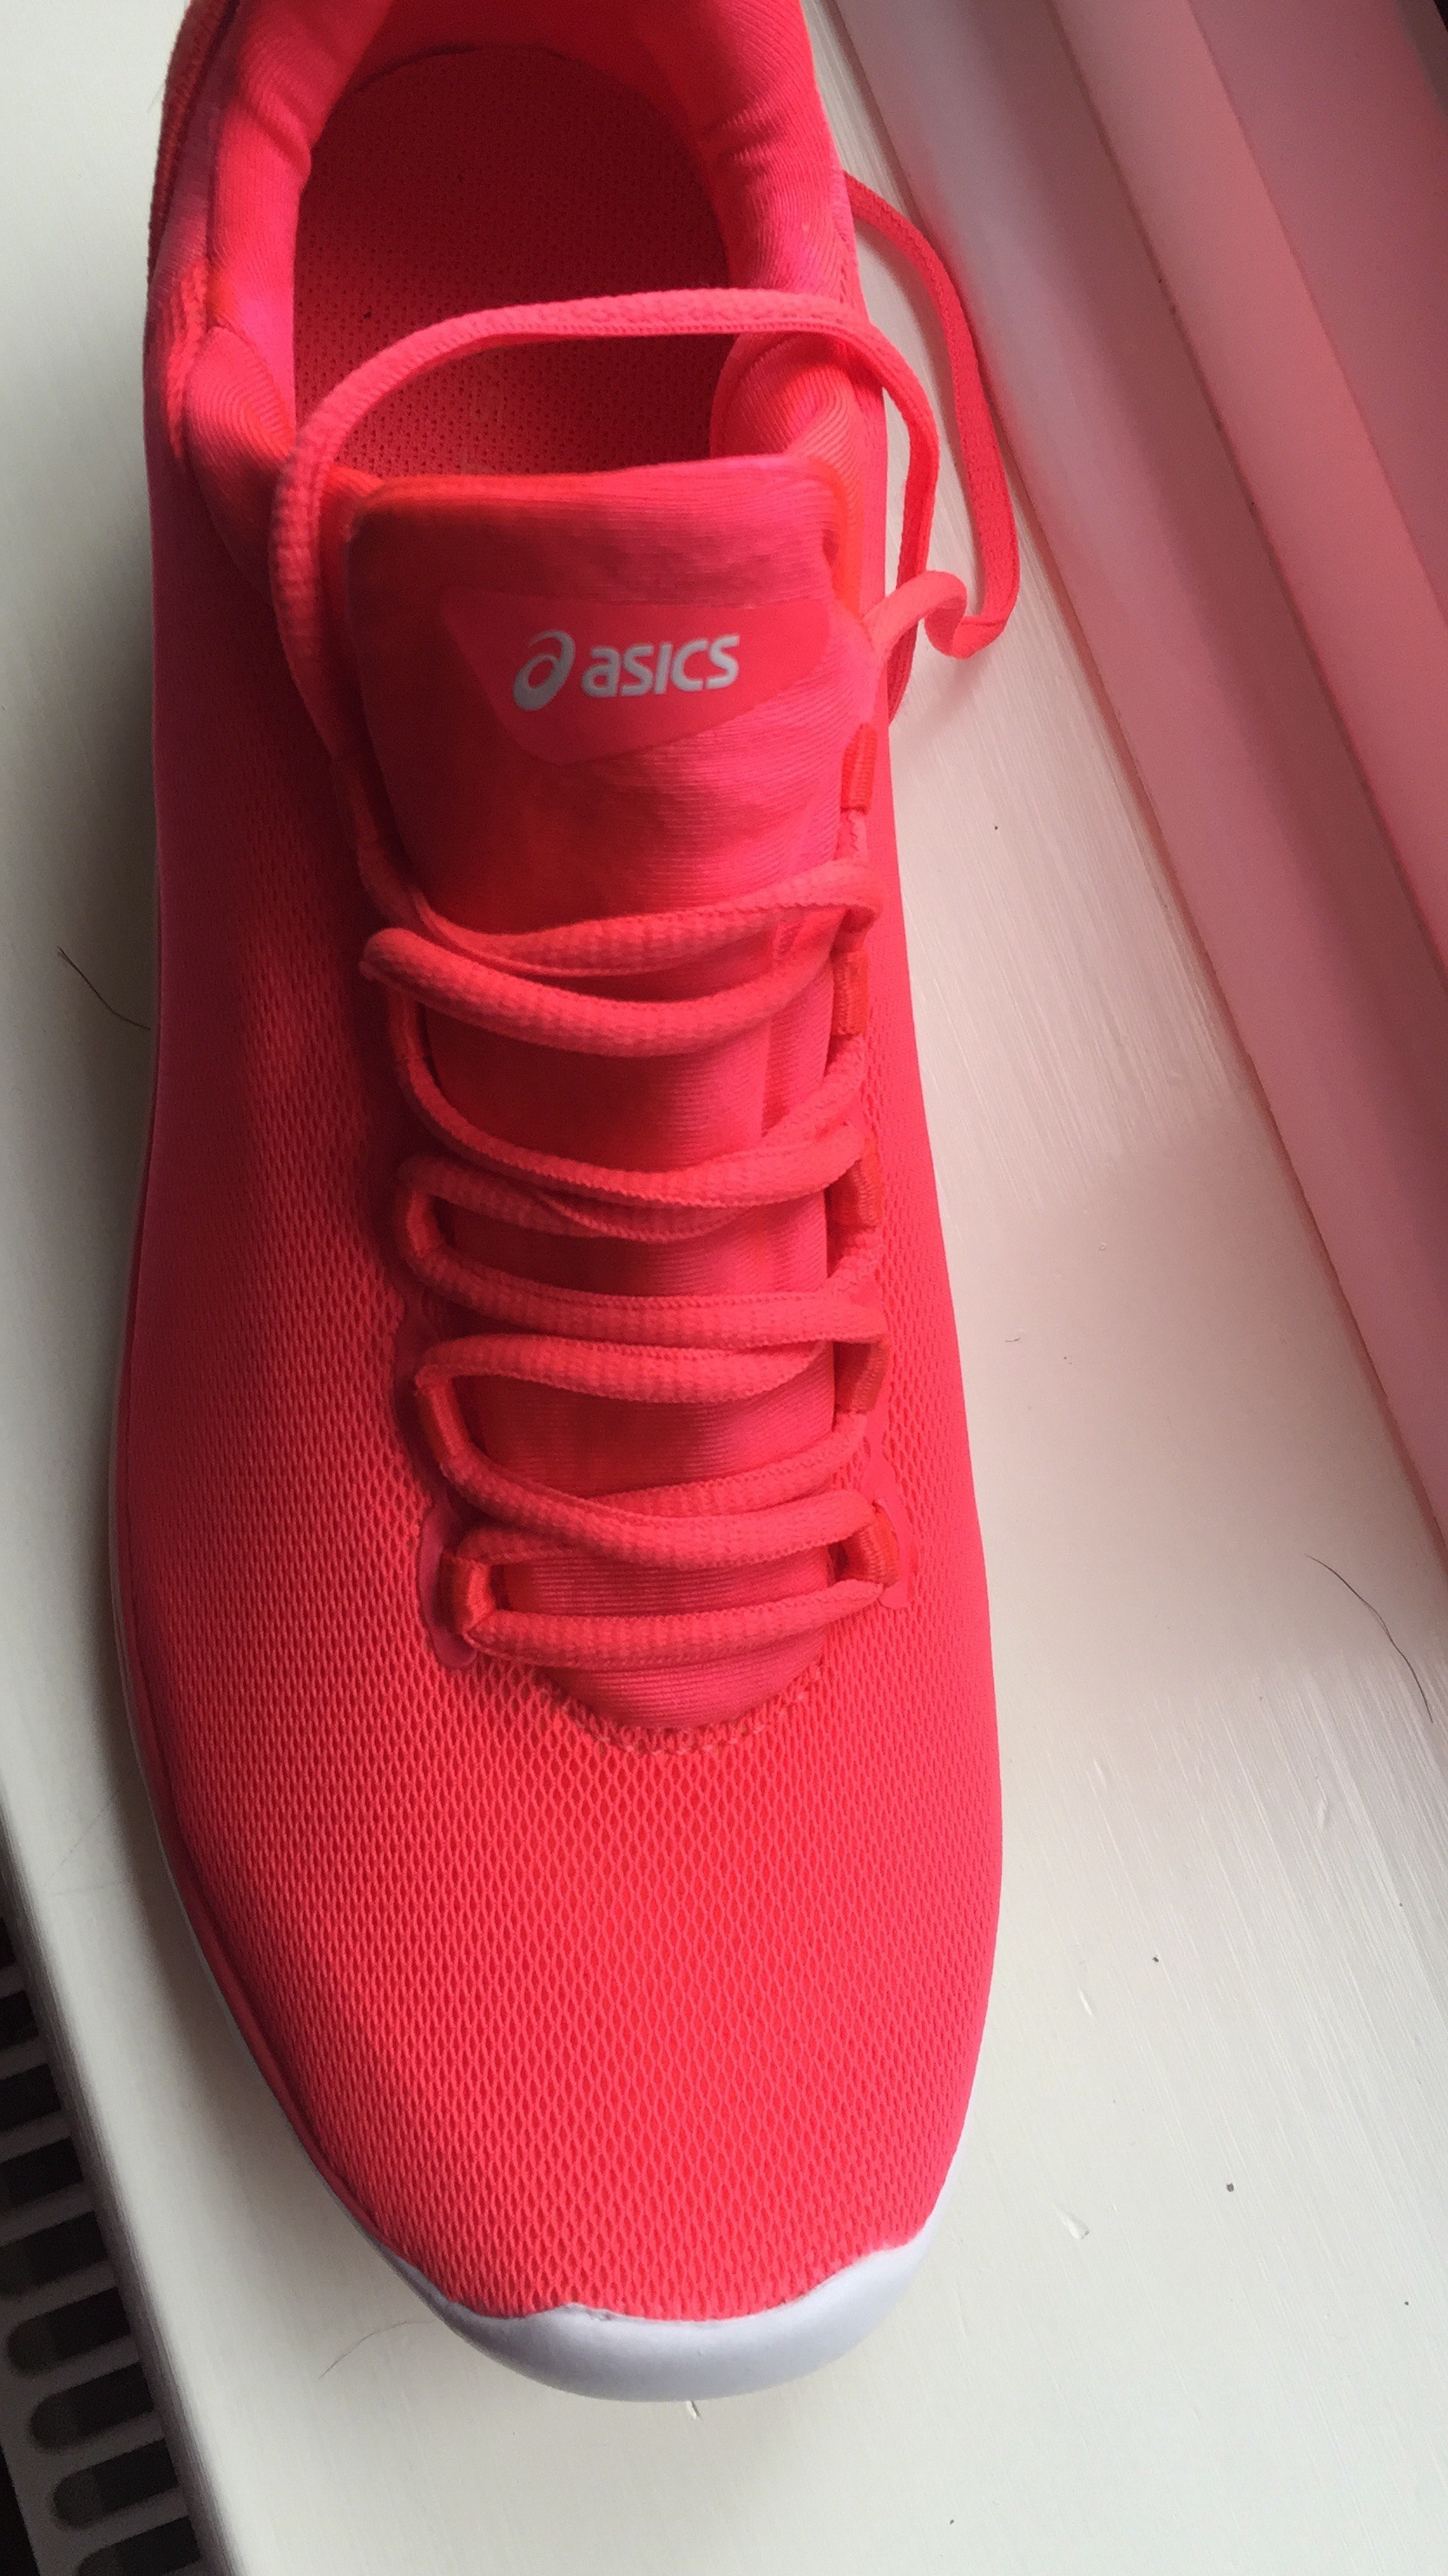 ASICS FrontRunner - The Most Comfortable Shoes Ever - ASICS Gel-Fit SANA 3